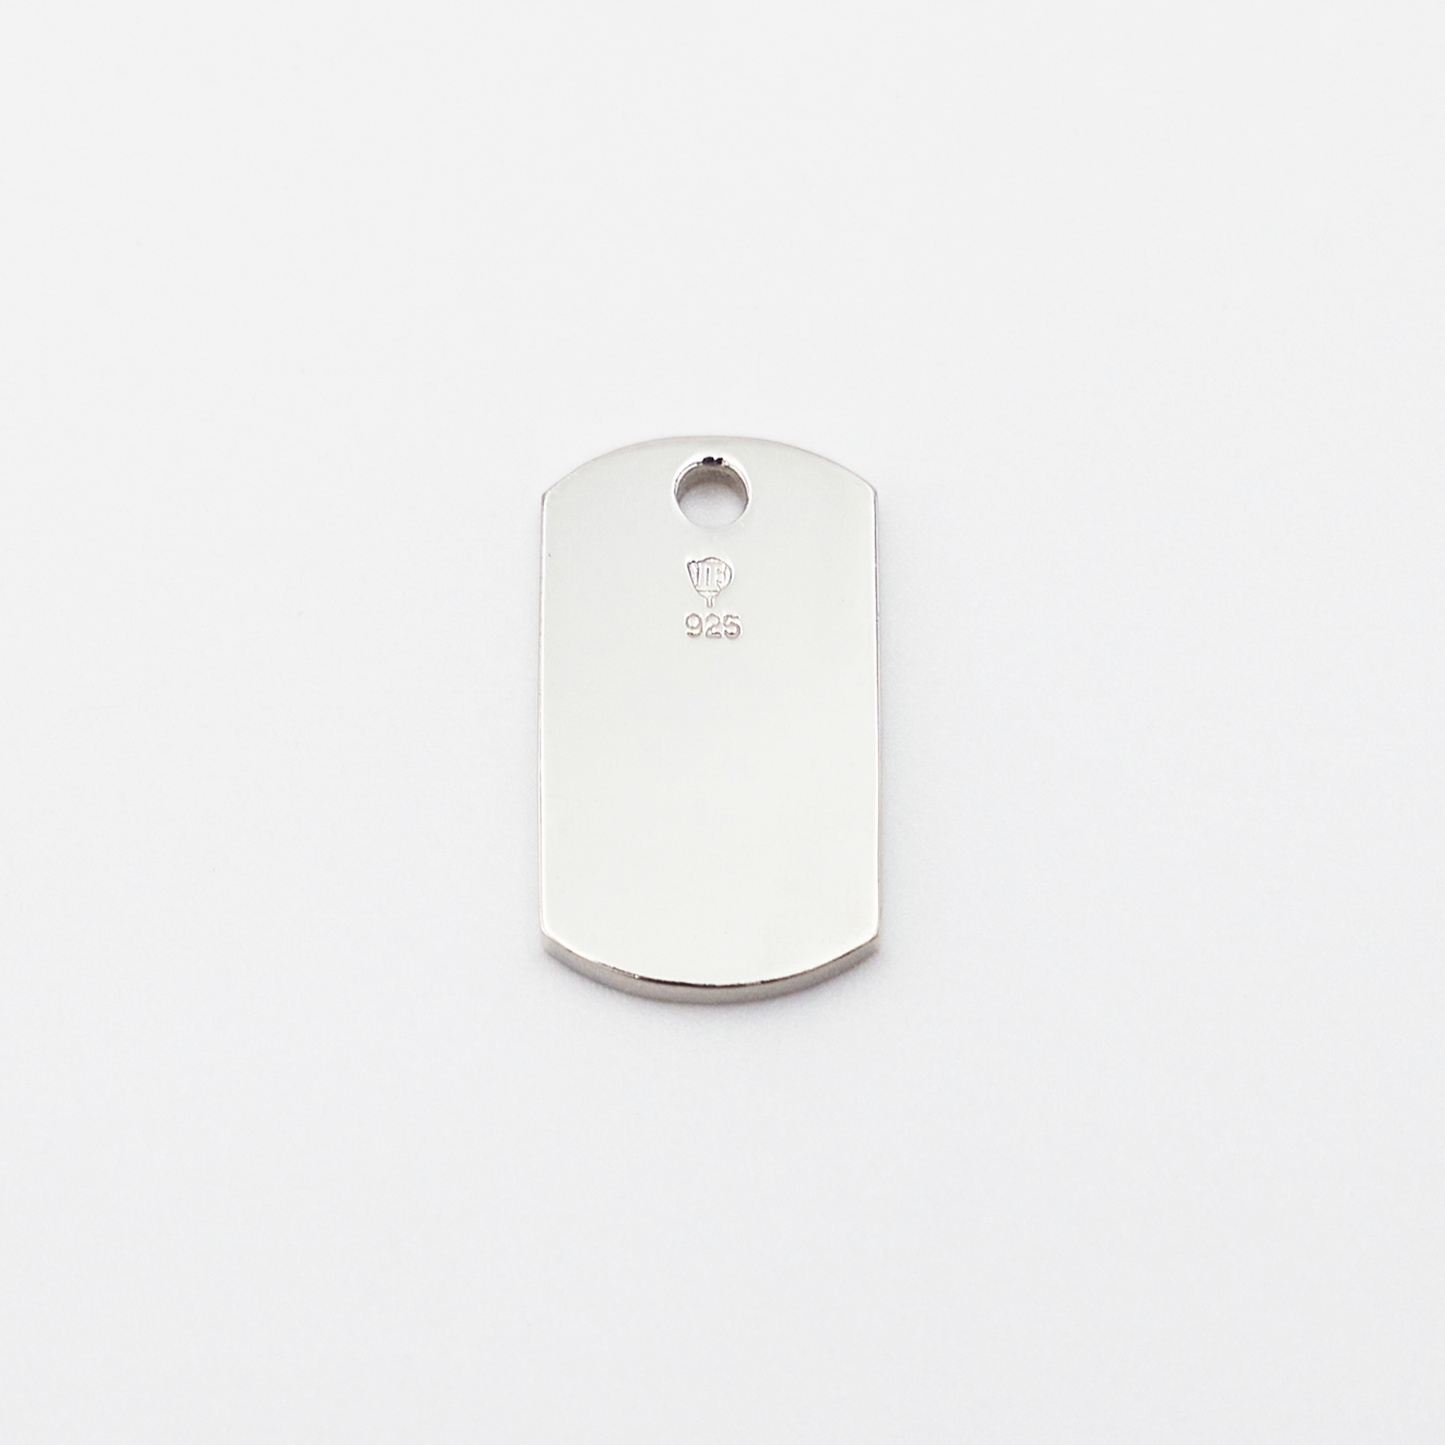 Plate-S ID Tag Chain Necklace